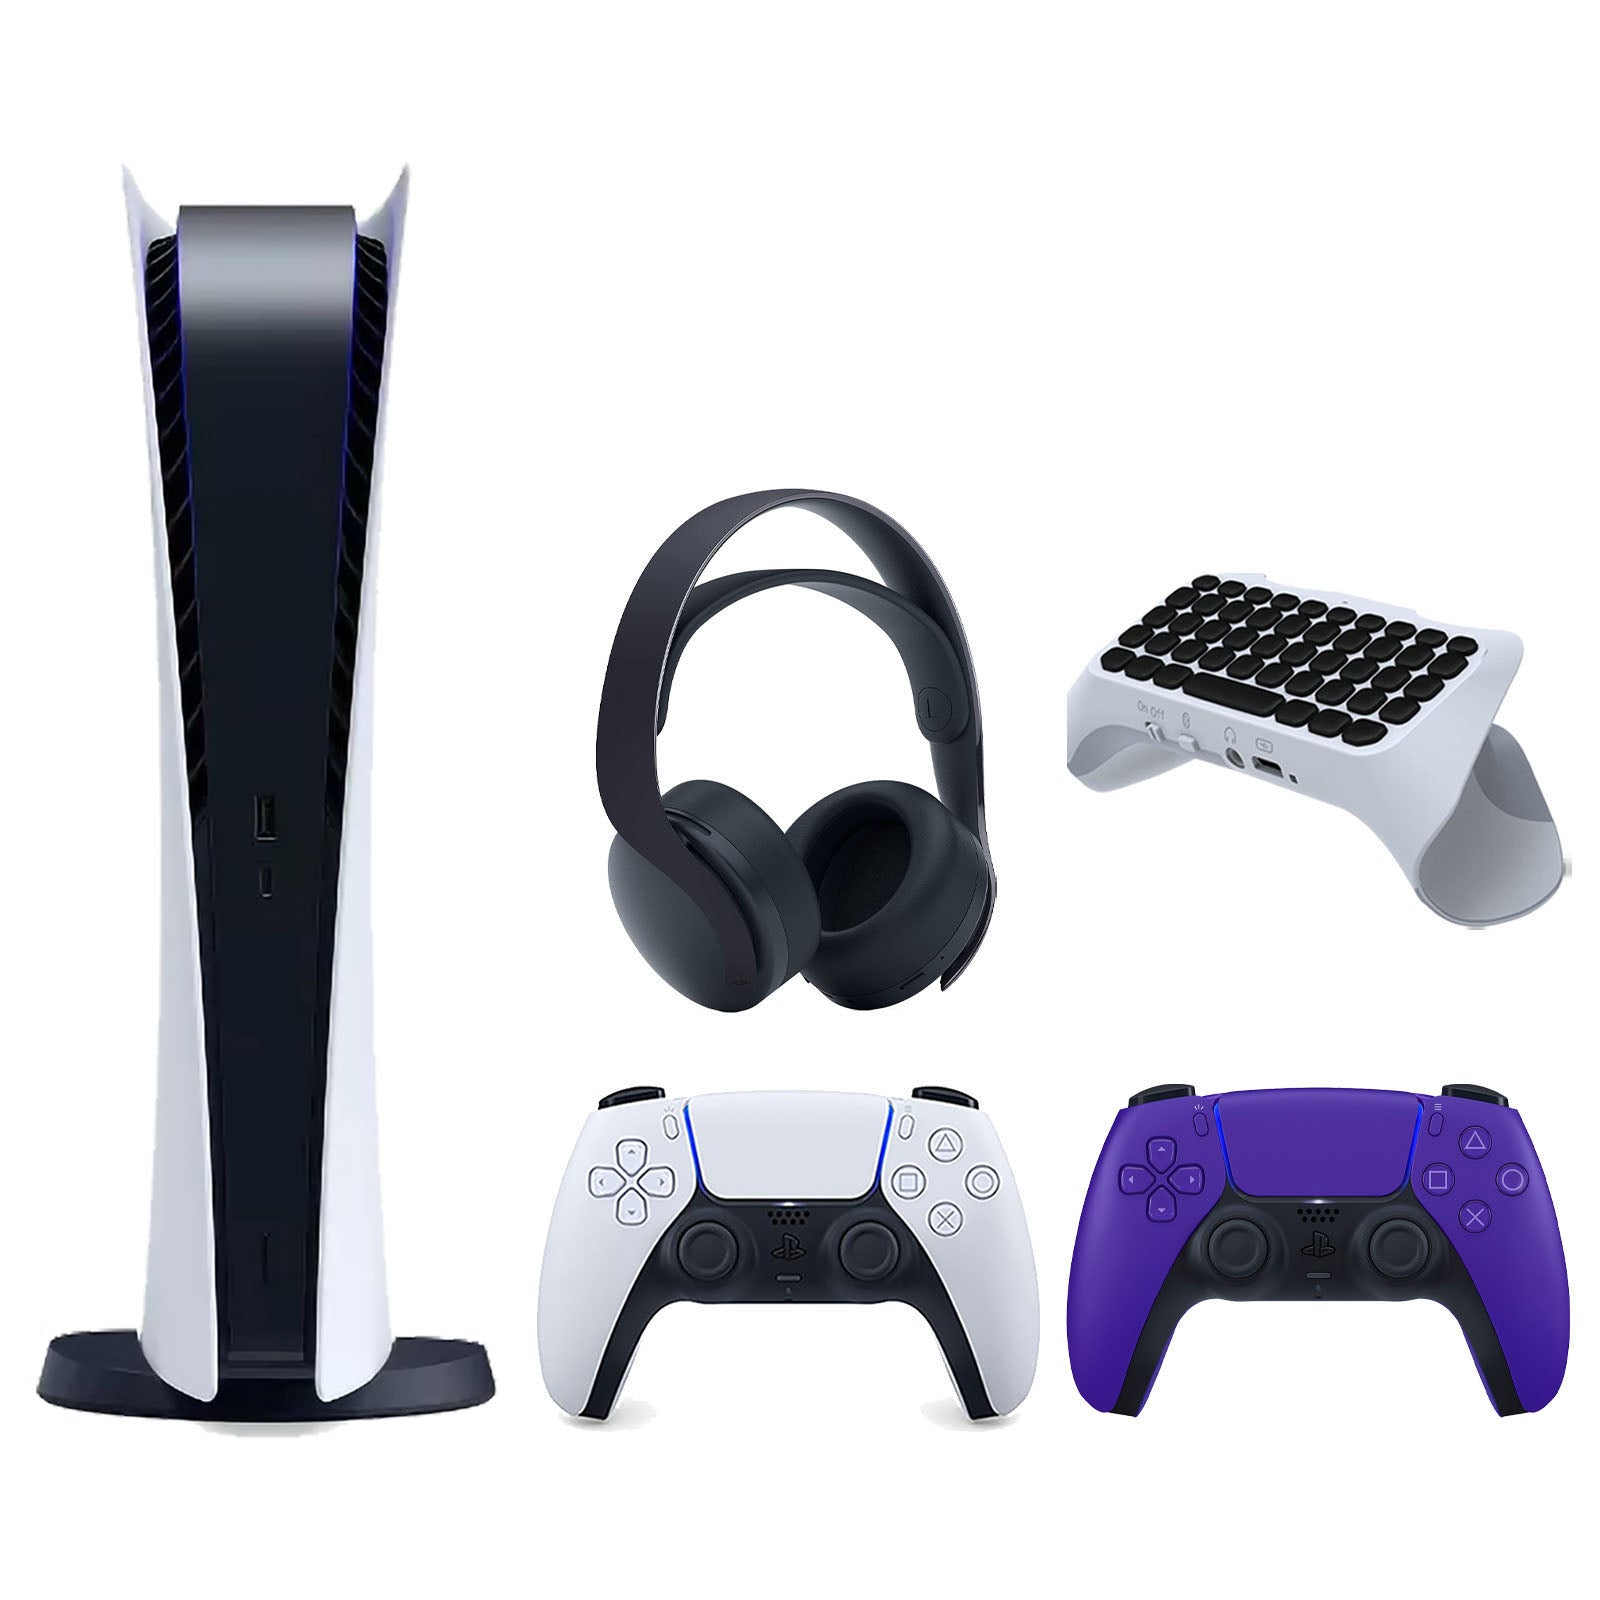 Sony Playstation 5 Digital Edition Console with Extra Purple Controller, Black PULSE 3D Headset and Surge QuickType 2.0 Wireless PS5 Controller Keypad Bundle - Pro-Distributing